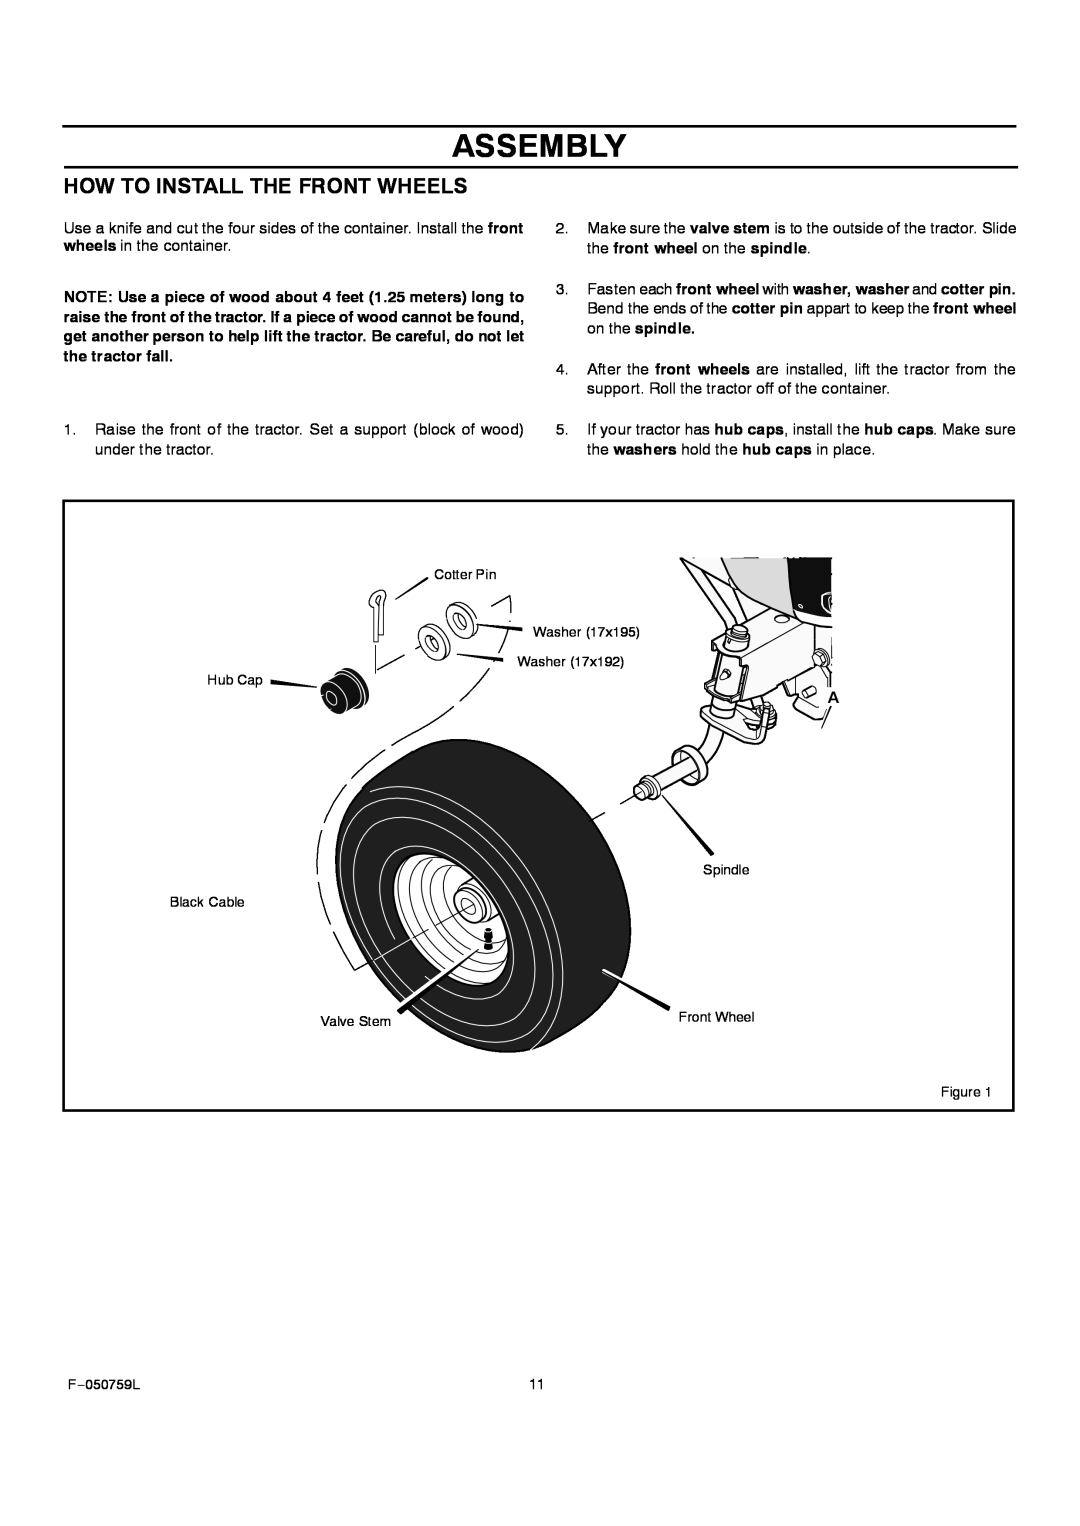 Rover 405012x108A owner manual How To Install The Front Wheels, Assembly 